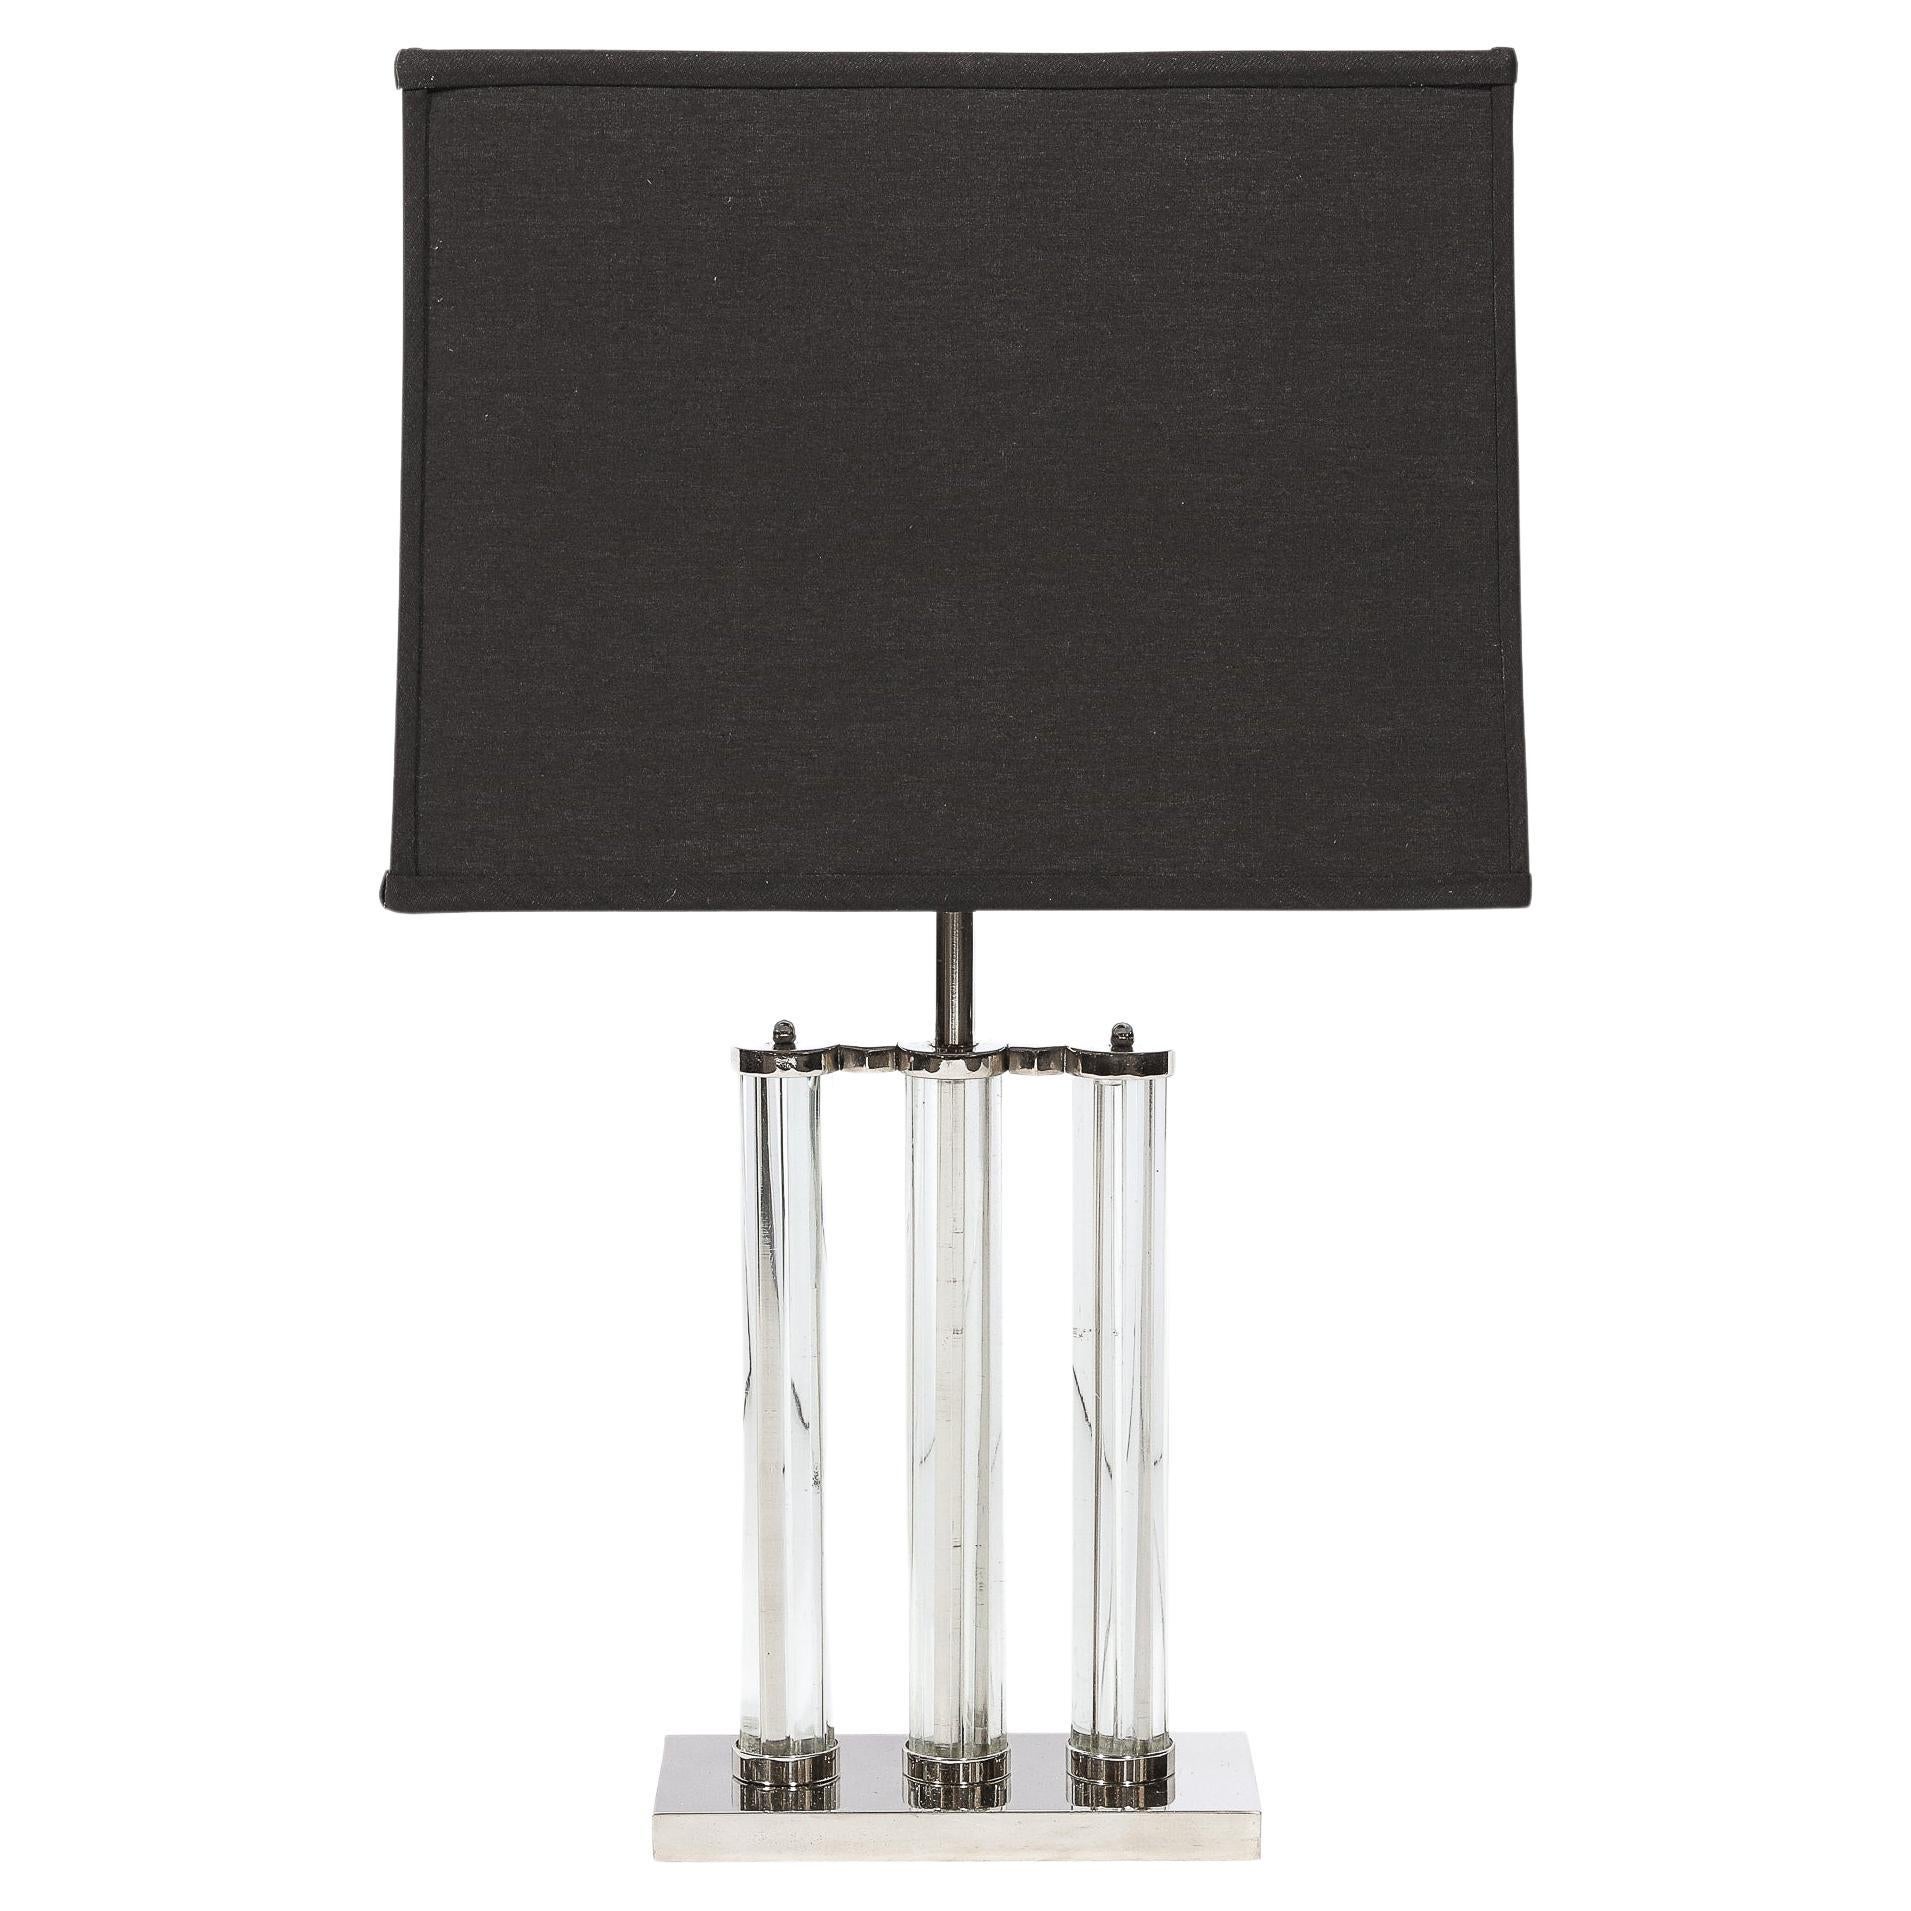 Art Deco Streamlined Cylindrical Form Table Lamp in Glass & Polished Nickel